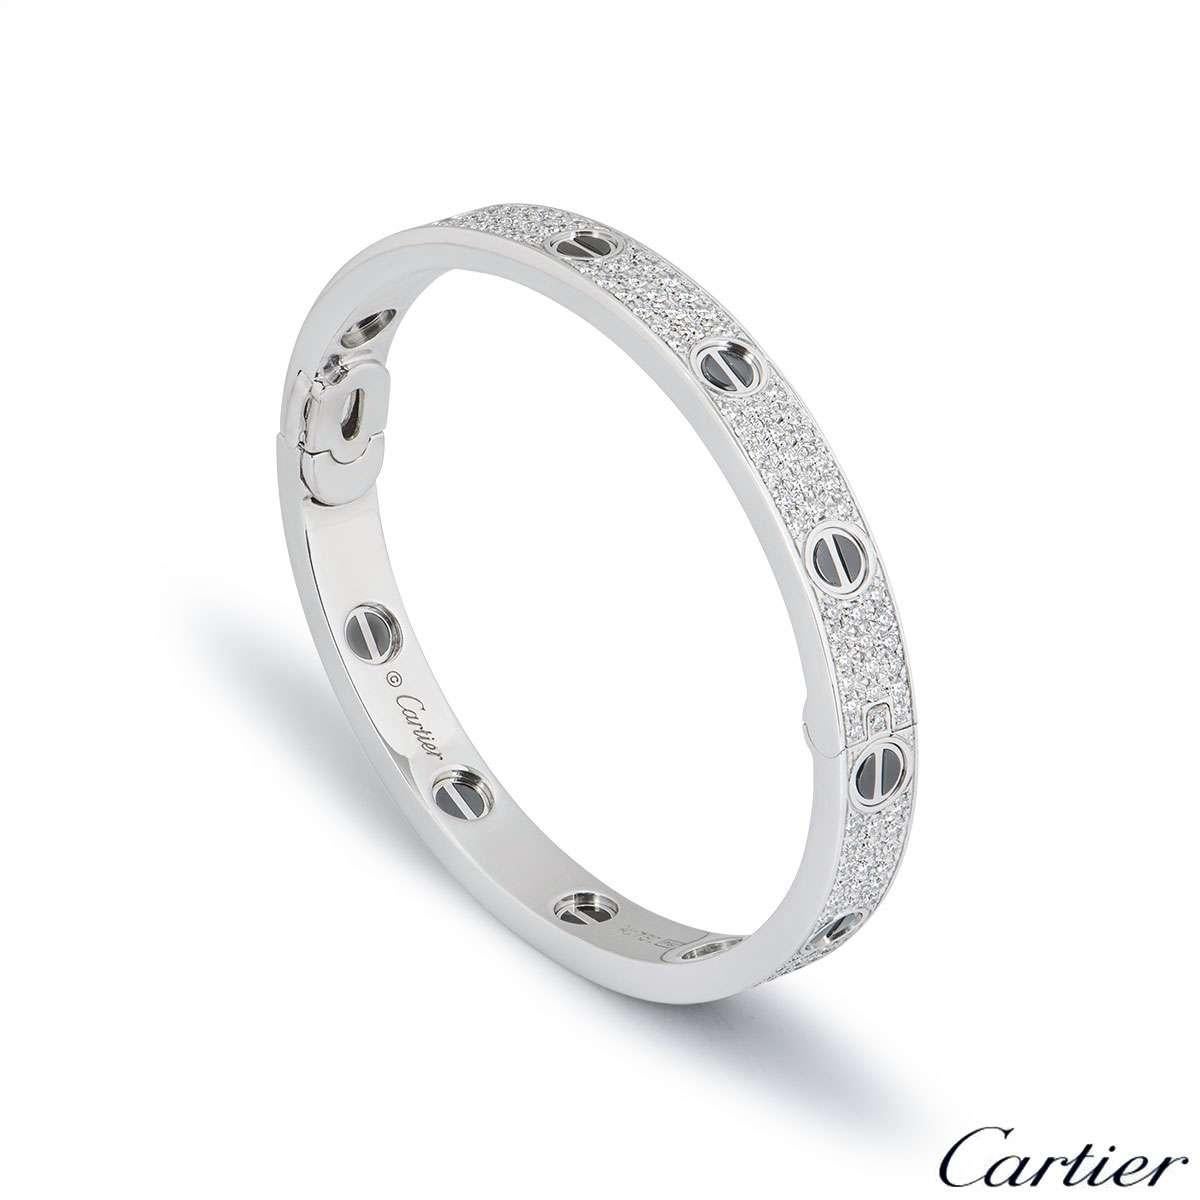 A stunning 18k white gold diamond and ceramic bracelet by Cartier from the Love collection. The bracelet has black ceramic on the iconic screw motif around the outer edge with 204 round brilliant cut diamonds pave set between the screws. The total